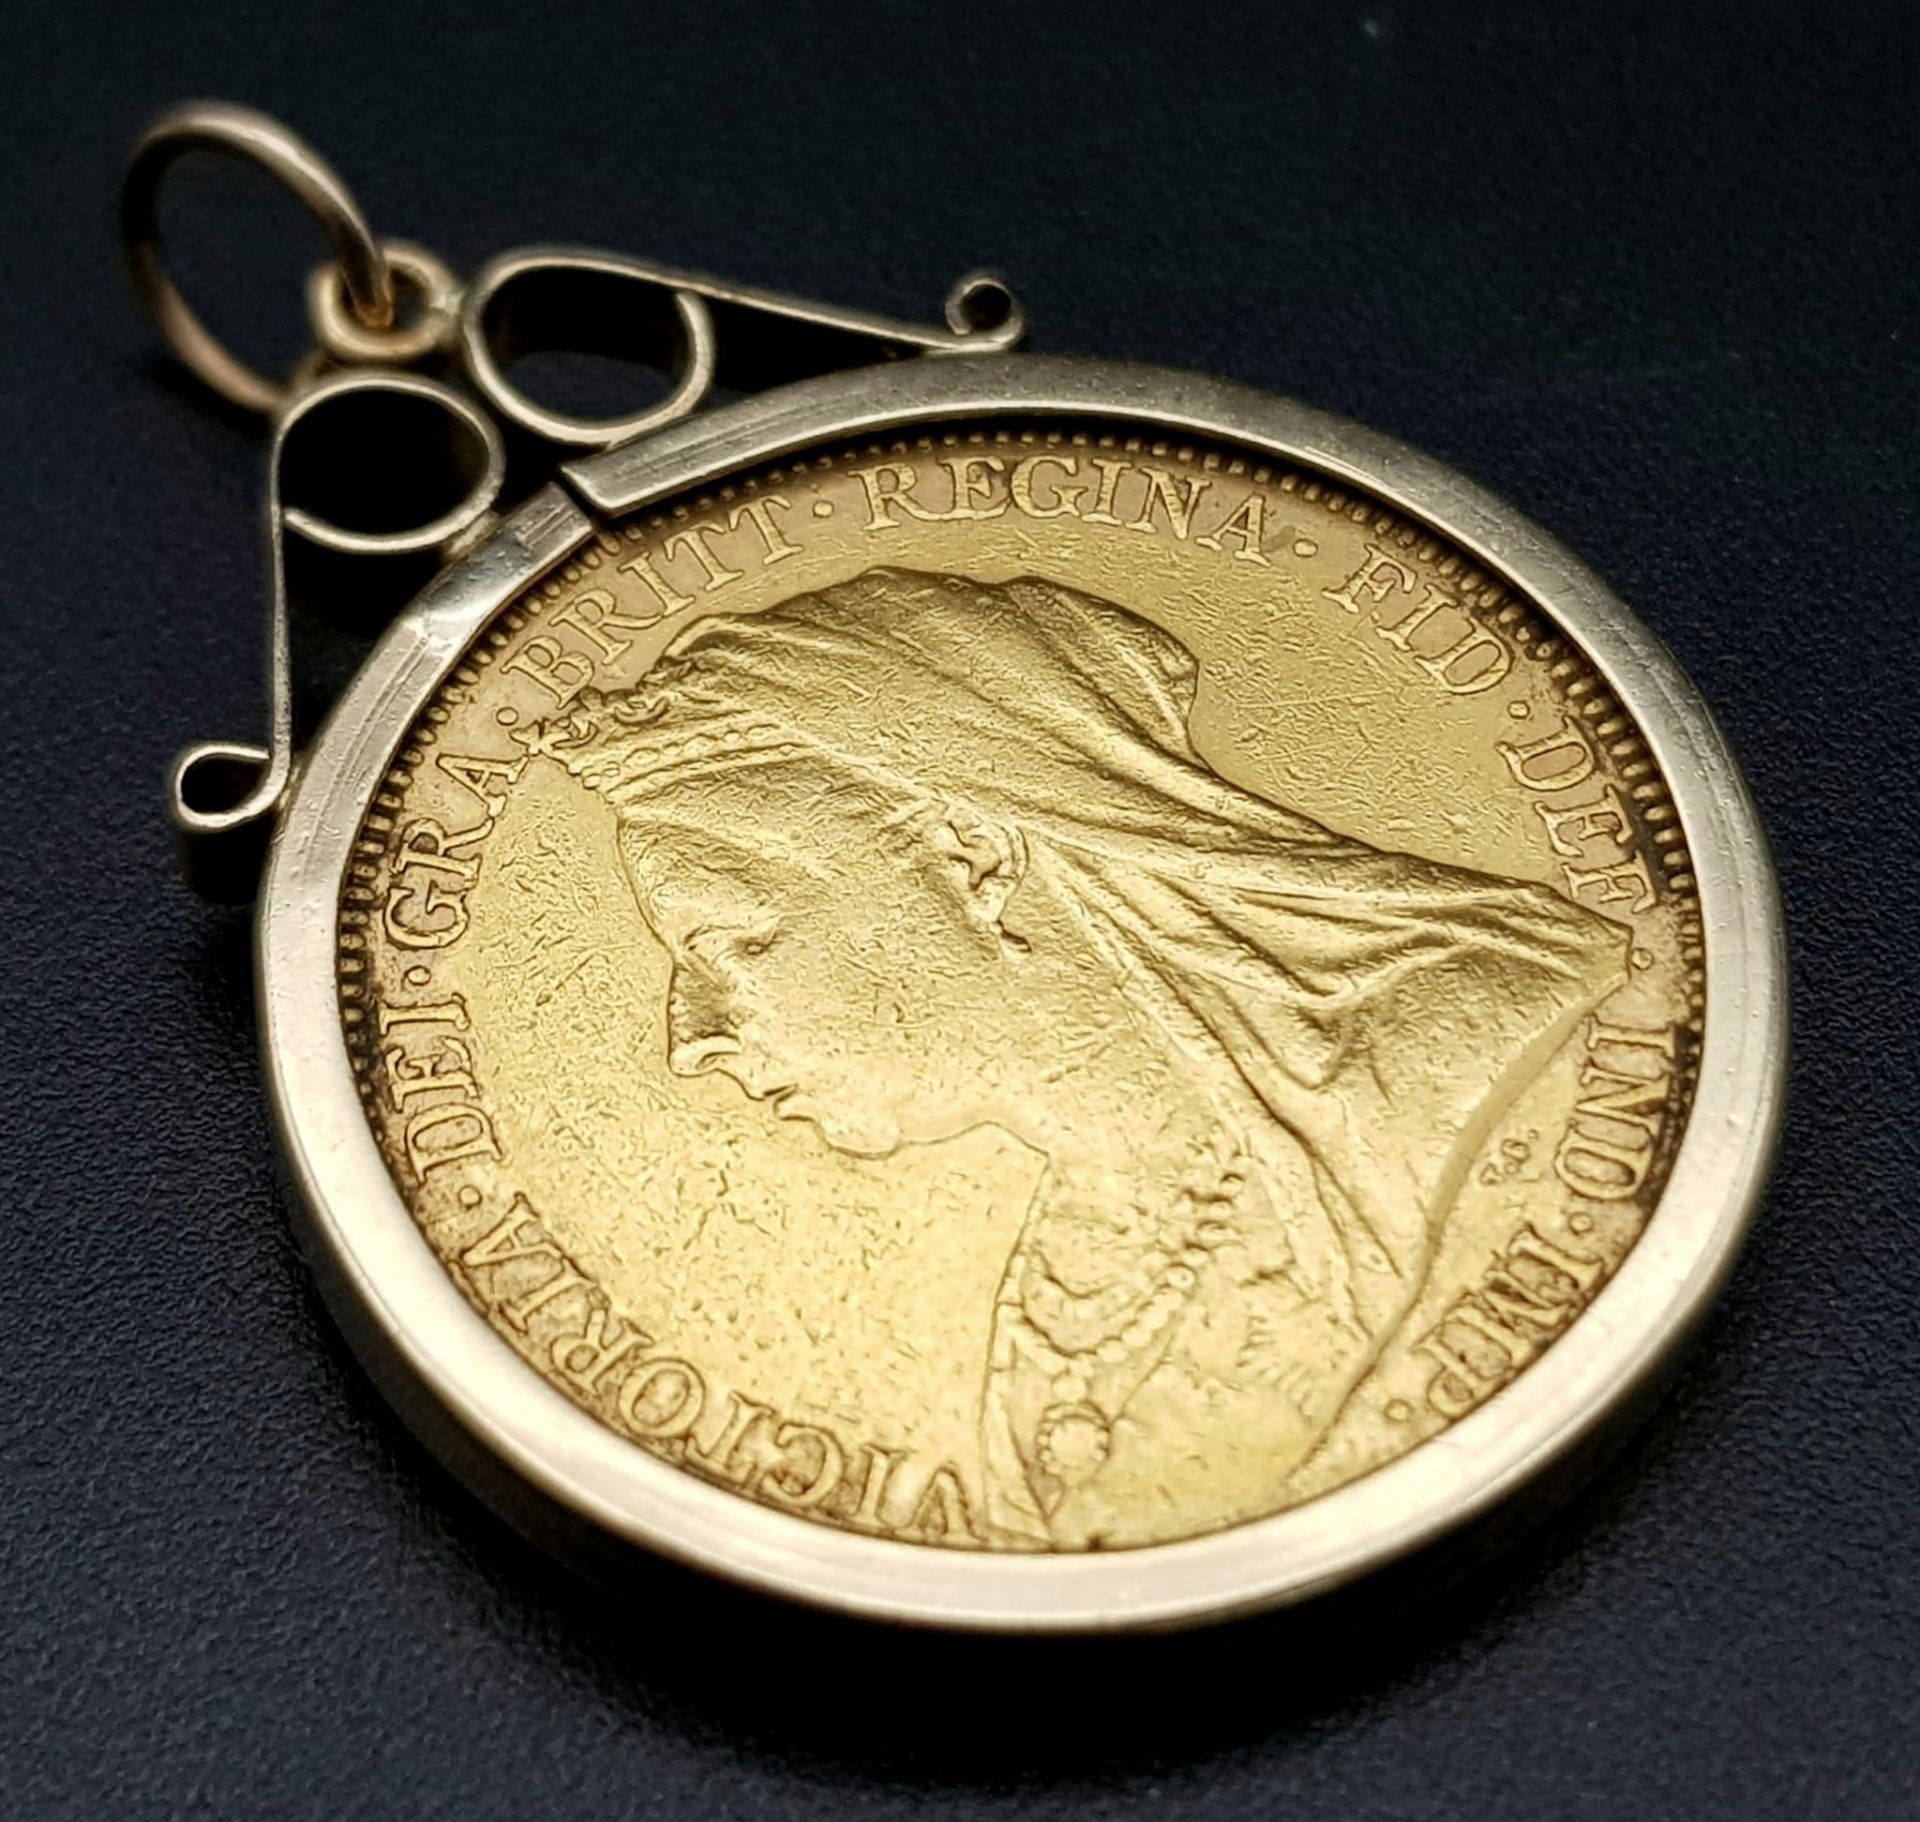 An 1896 Queen Victoria 22K Gold Full Sovereign in a 9K Gold Casing. 9.47g total weight. - Image 2 of 3